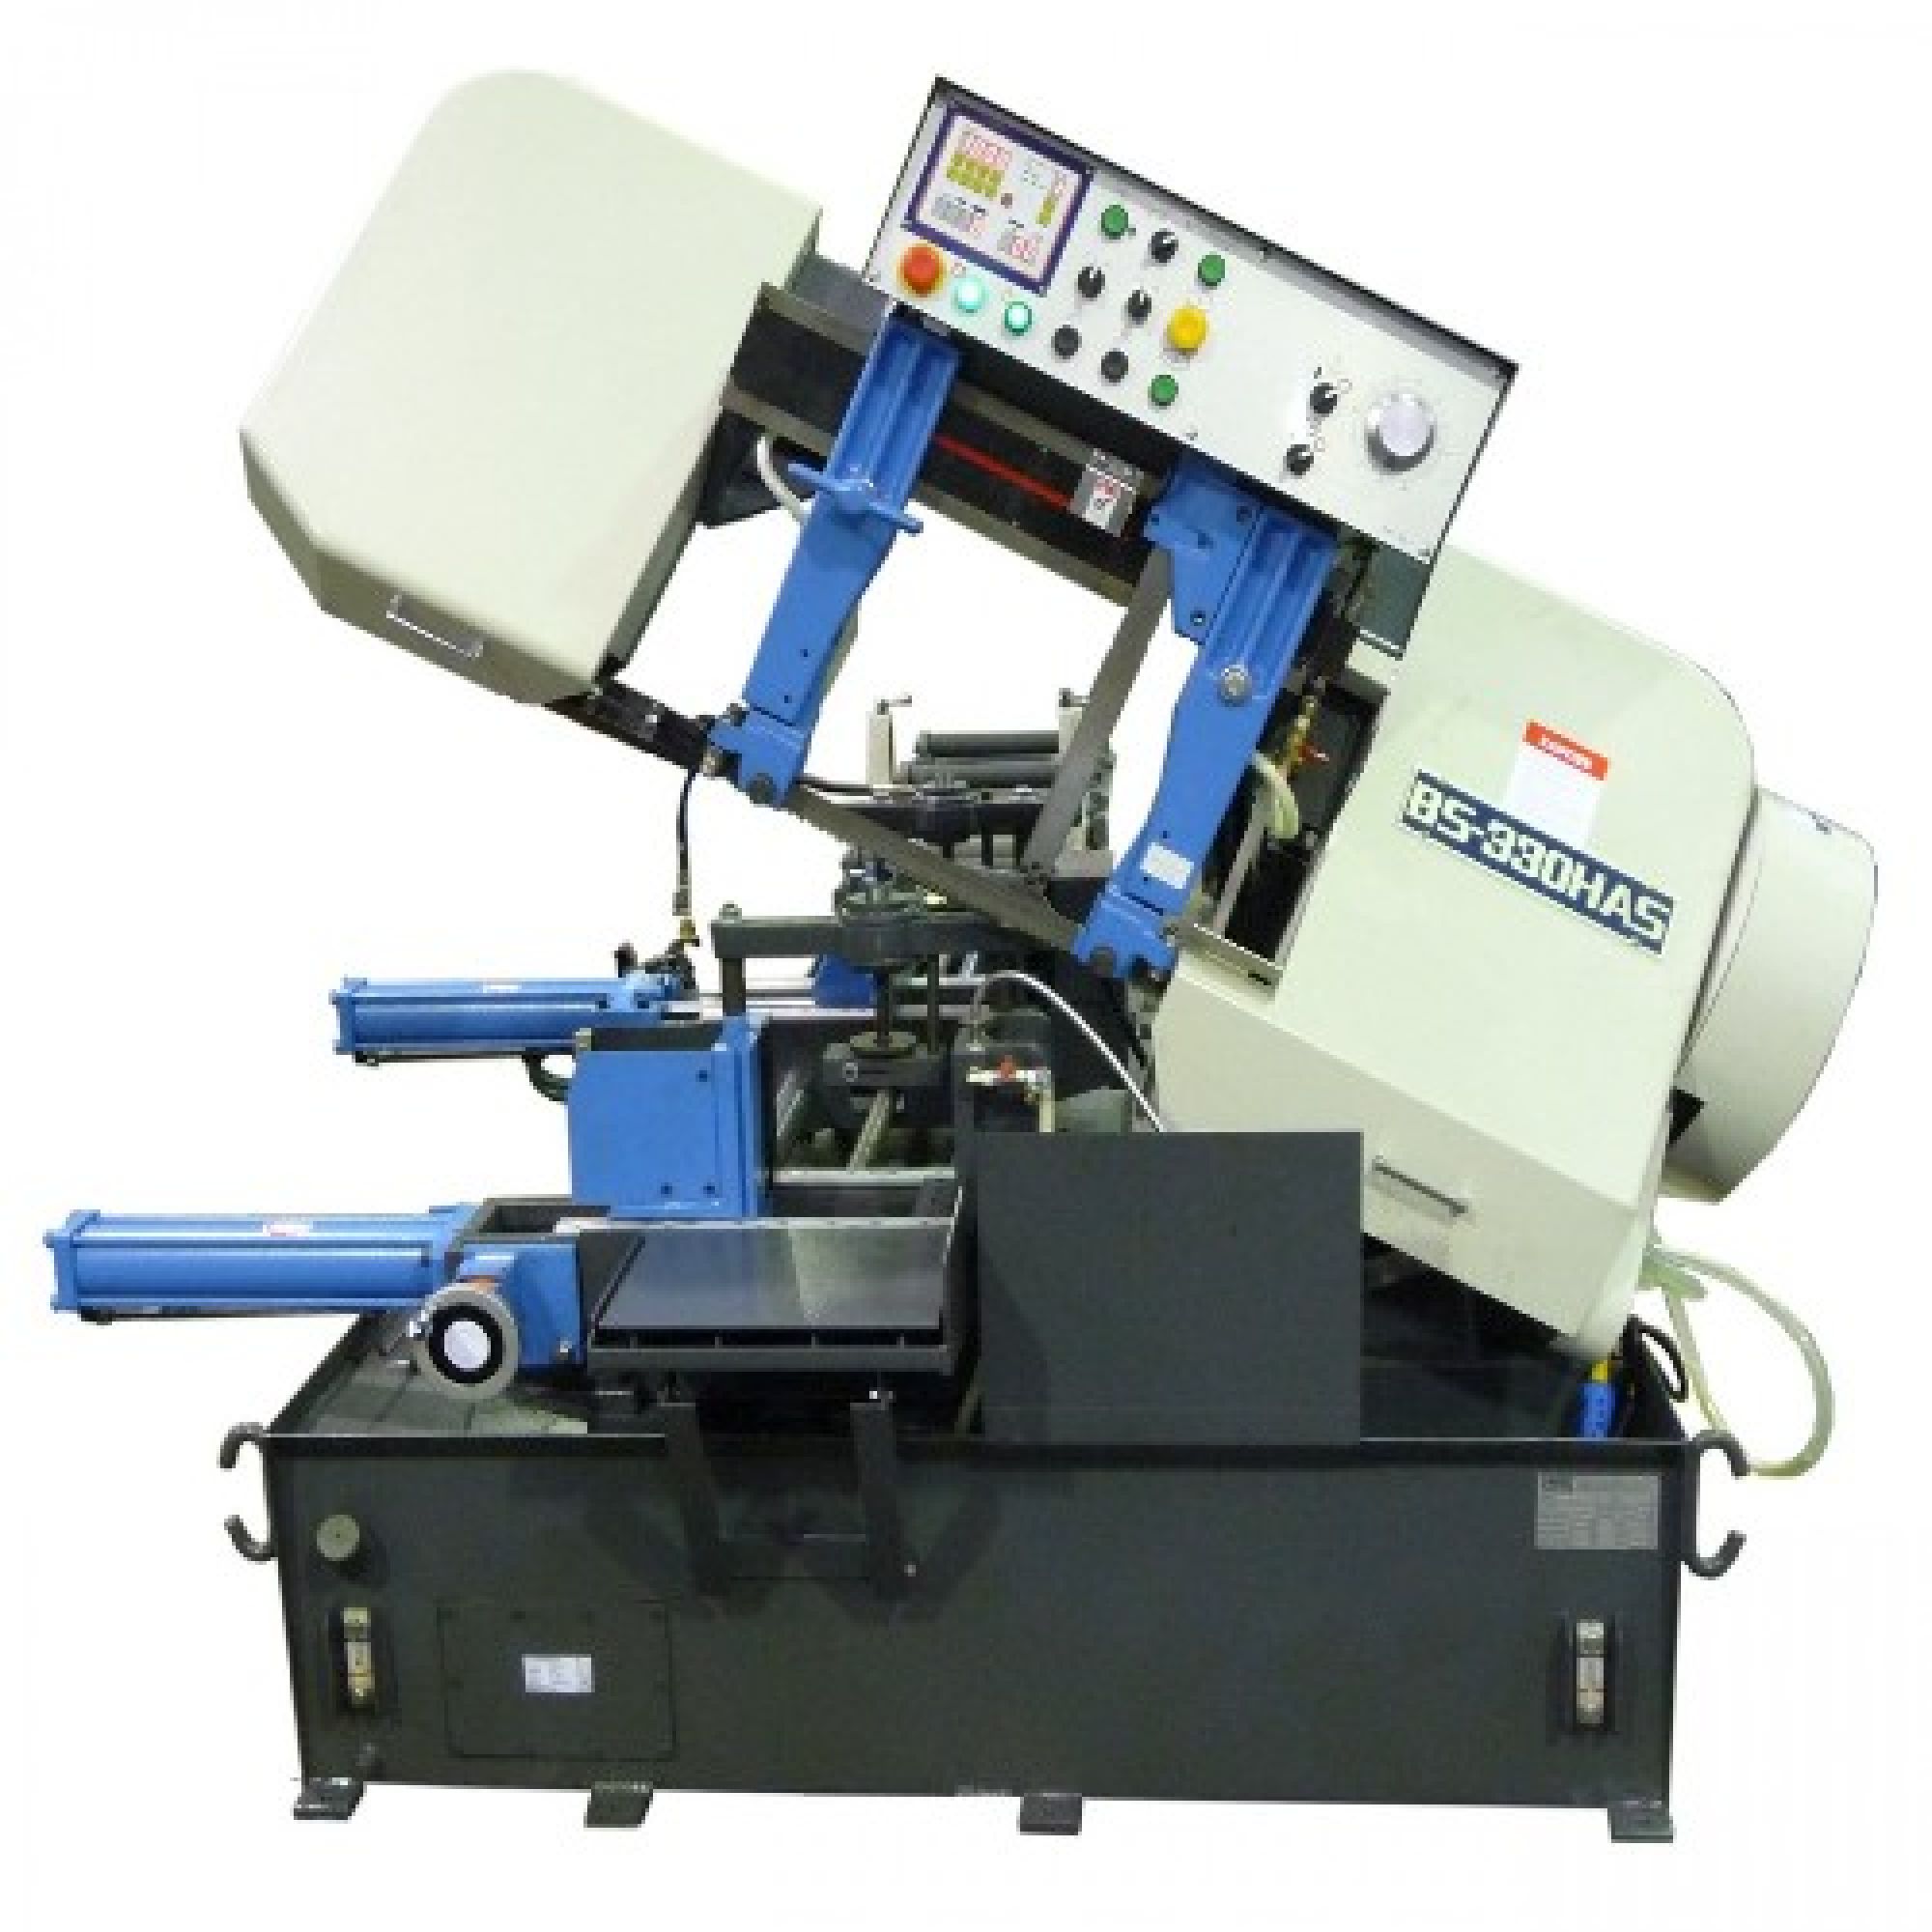 SDBS 330HAS Automatic Bandsaw